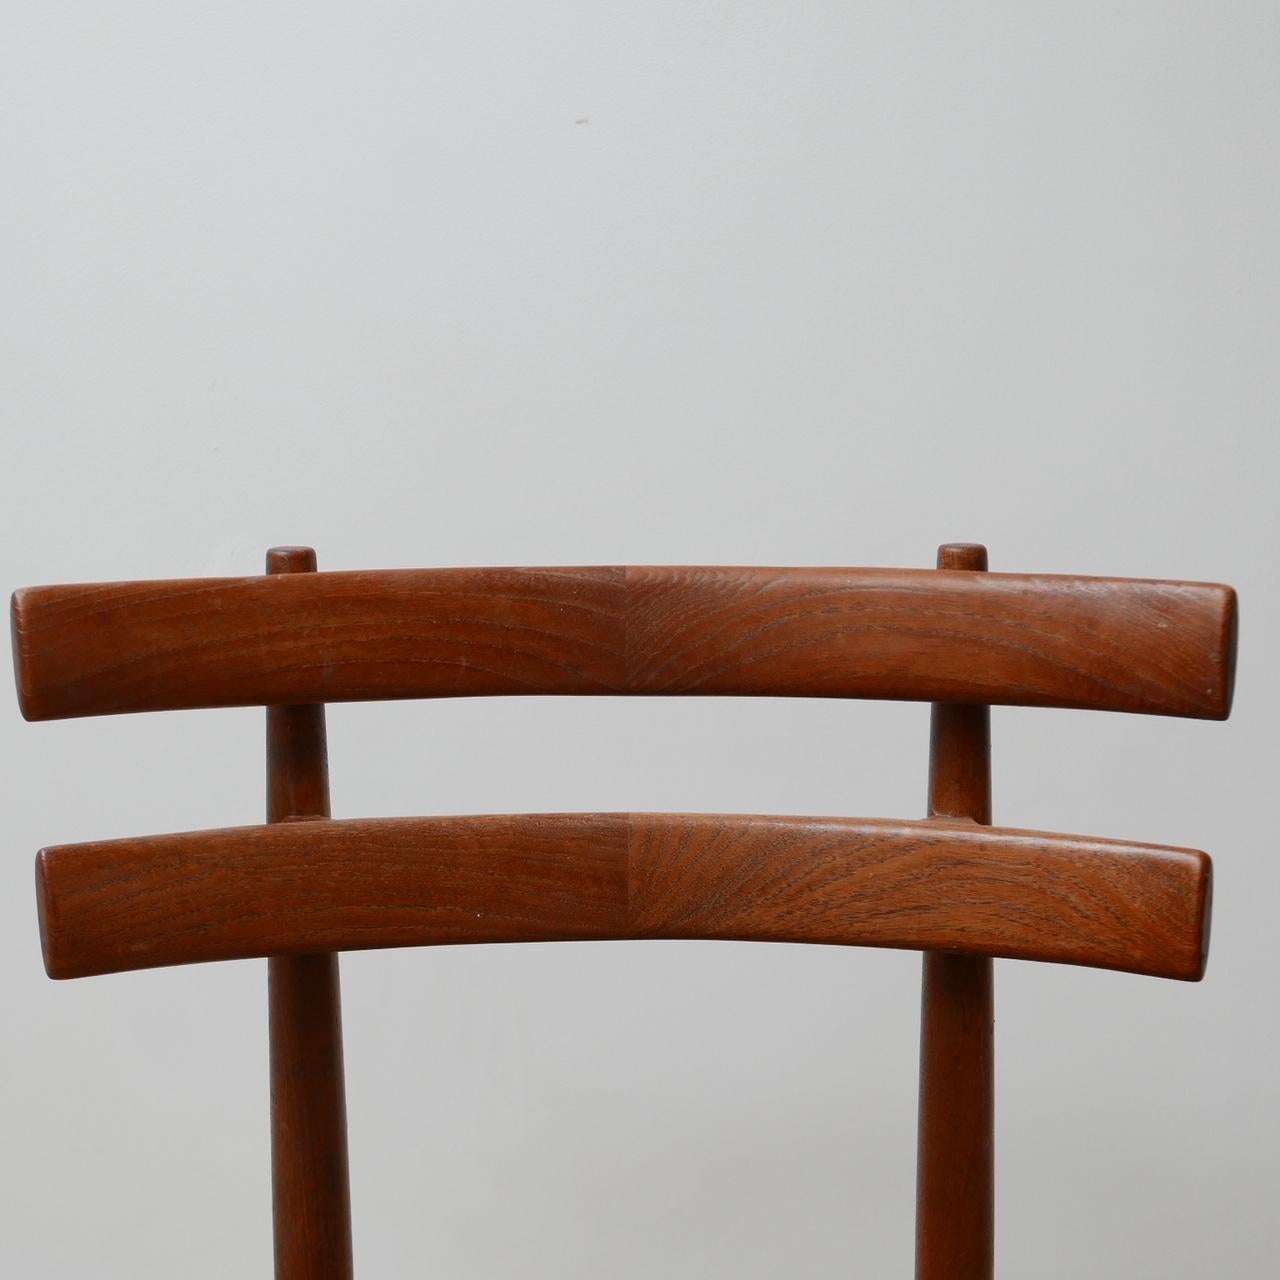 Mid-20th Century Teak Midcentury Dining Chairs by Poul Hundevad